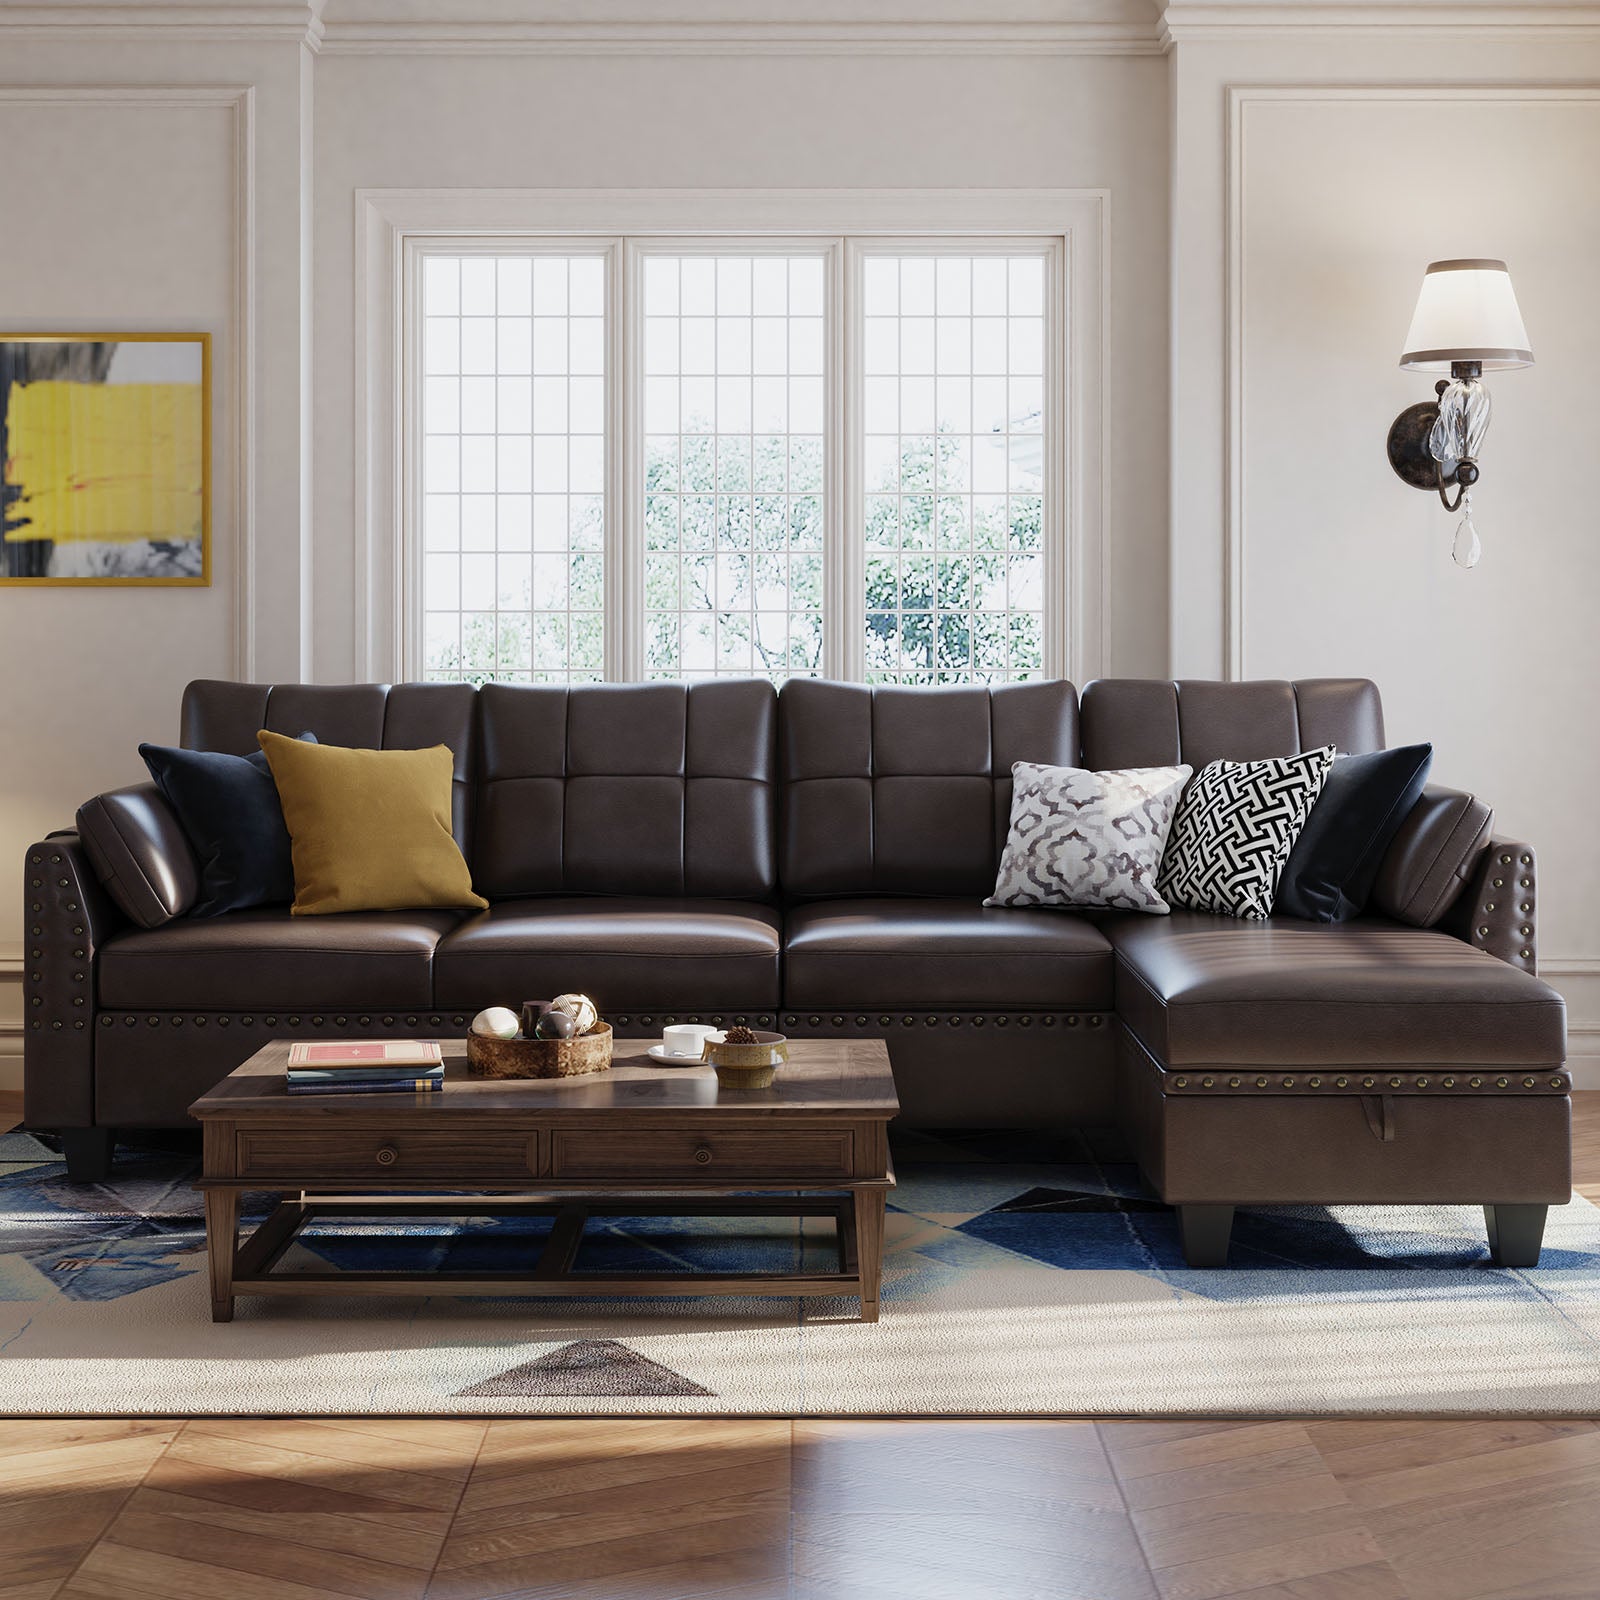 HONBAY Brown Faux Leather Flexible Combination Sofa